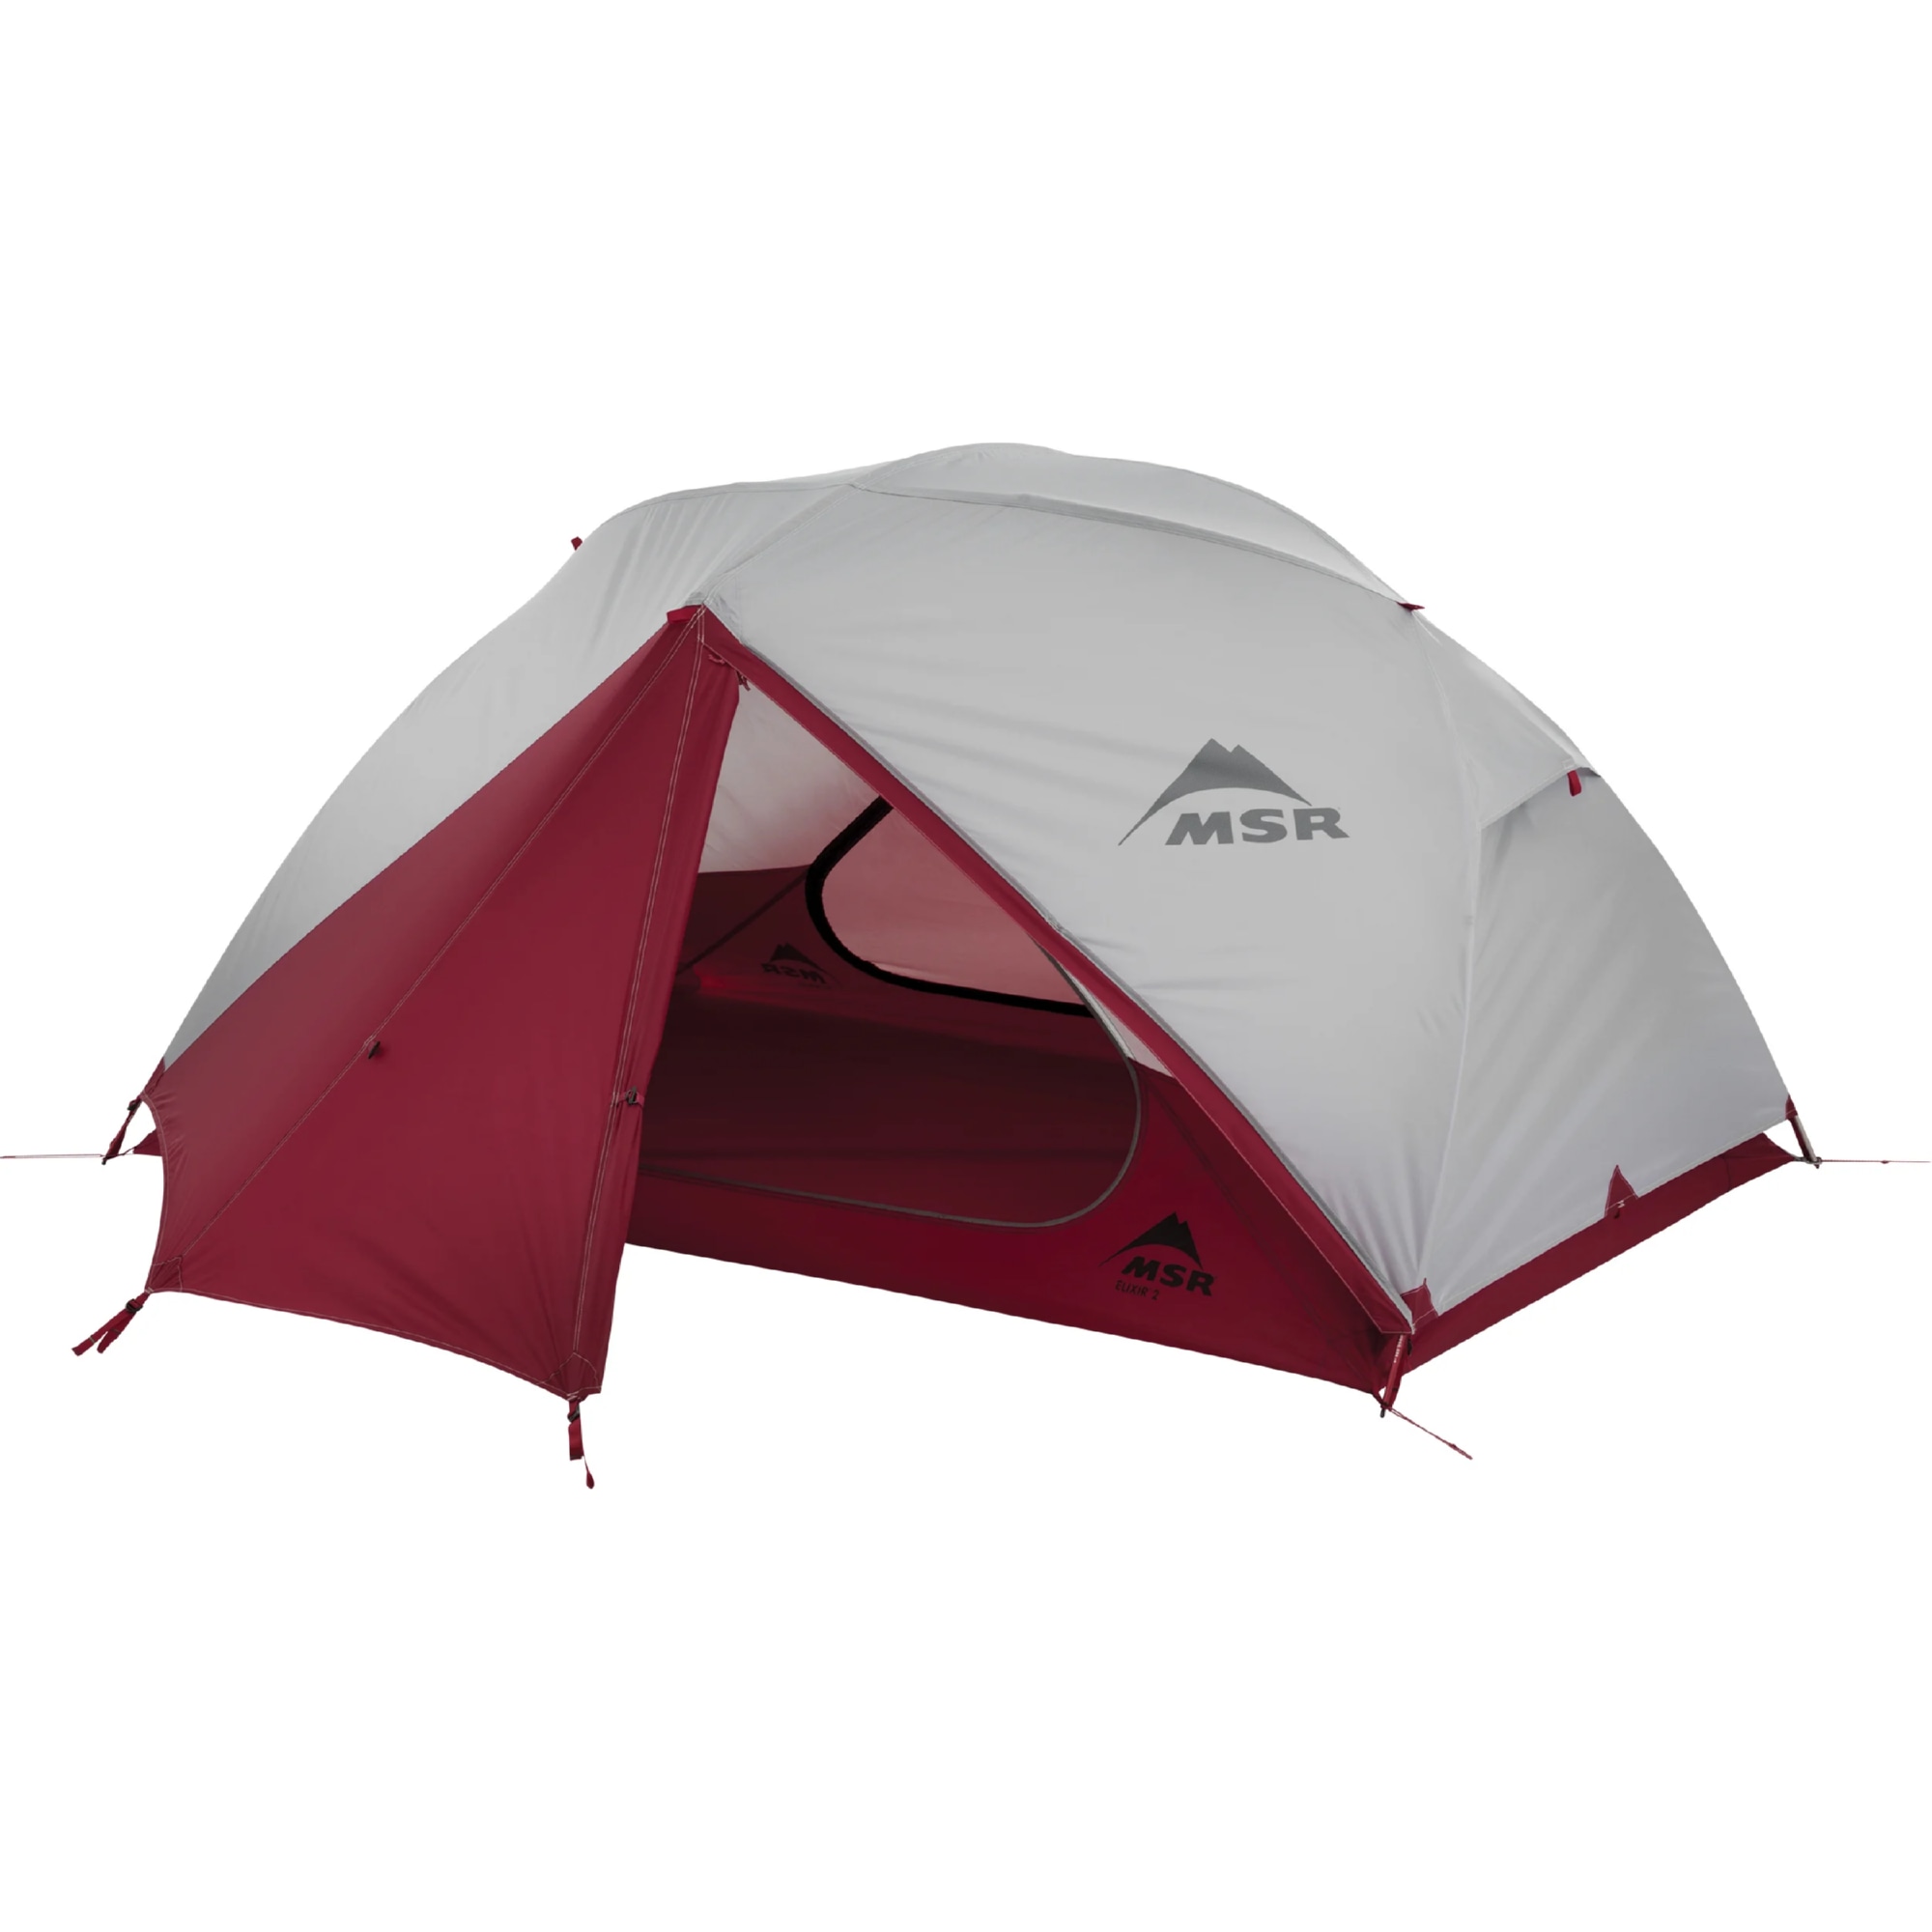 Elixir 2 Person Backpacking Tent